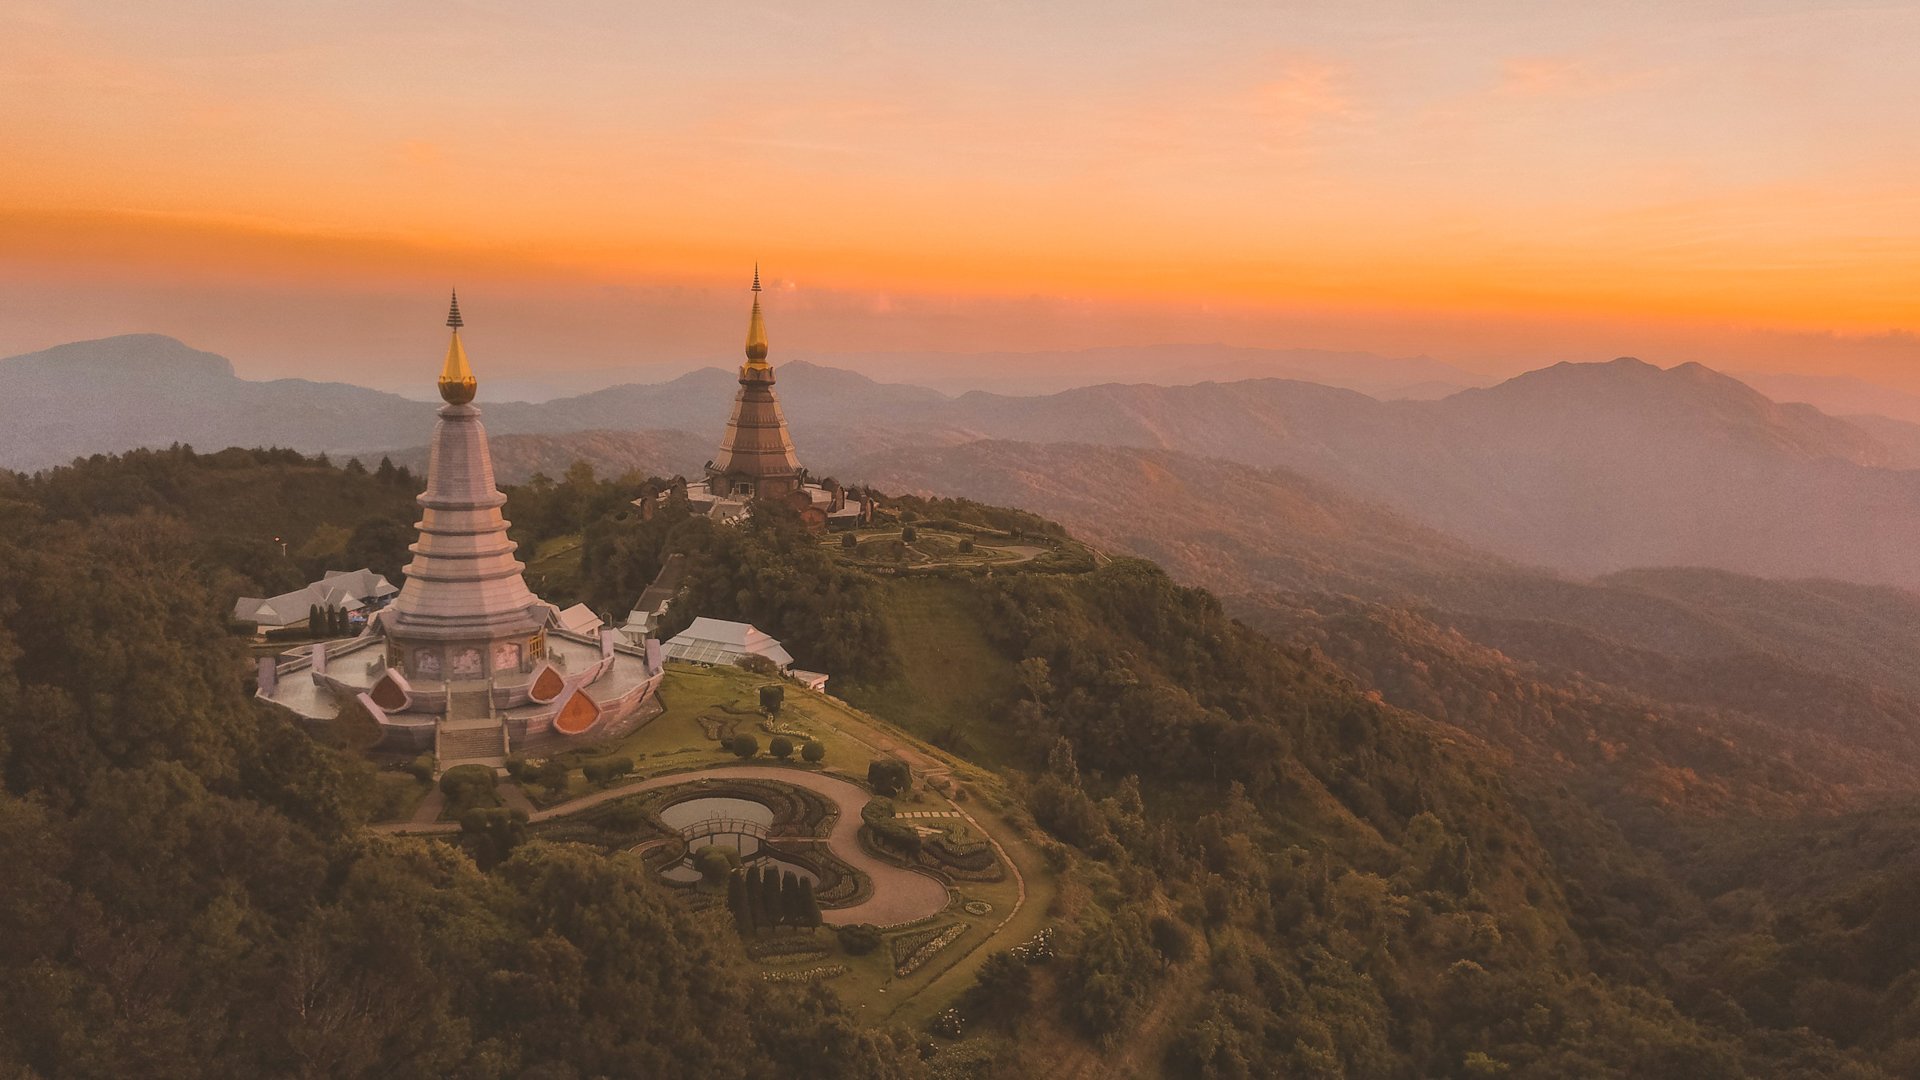 top things to do in Chiang Mai, Chiang Mai attractions - Doi Inthanon National Park - the roof of Thailand - country's highest peak